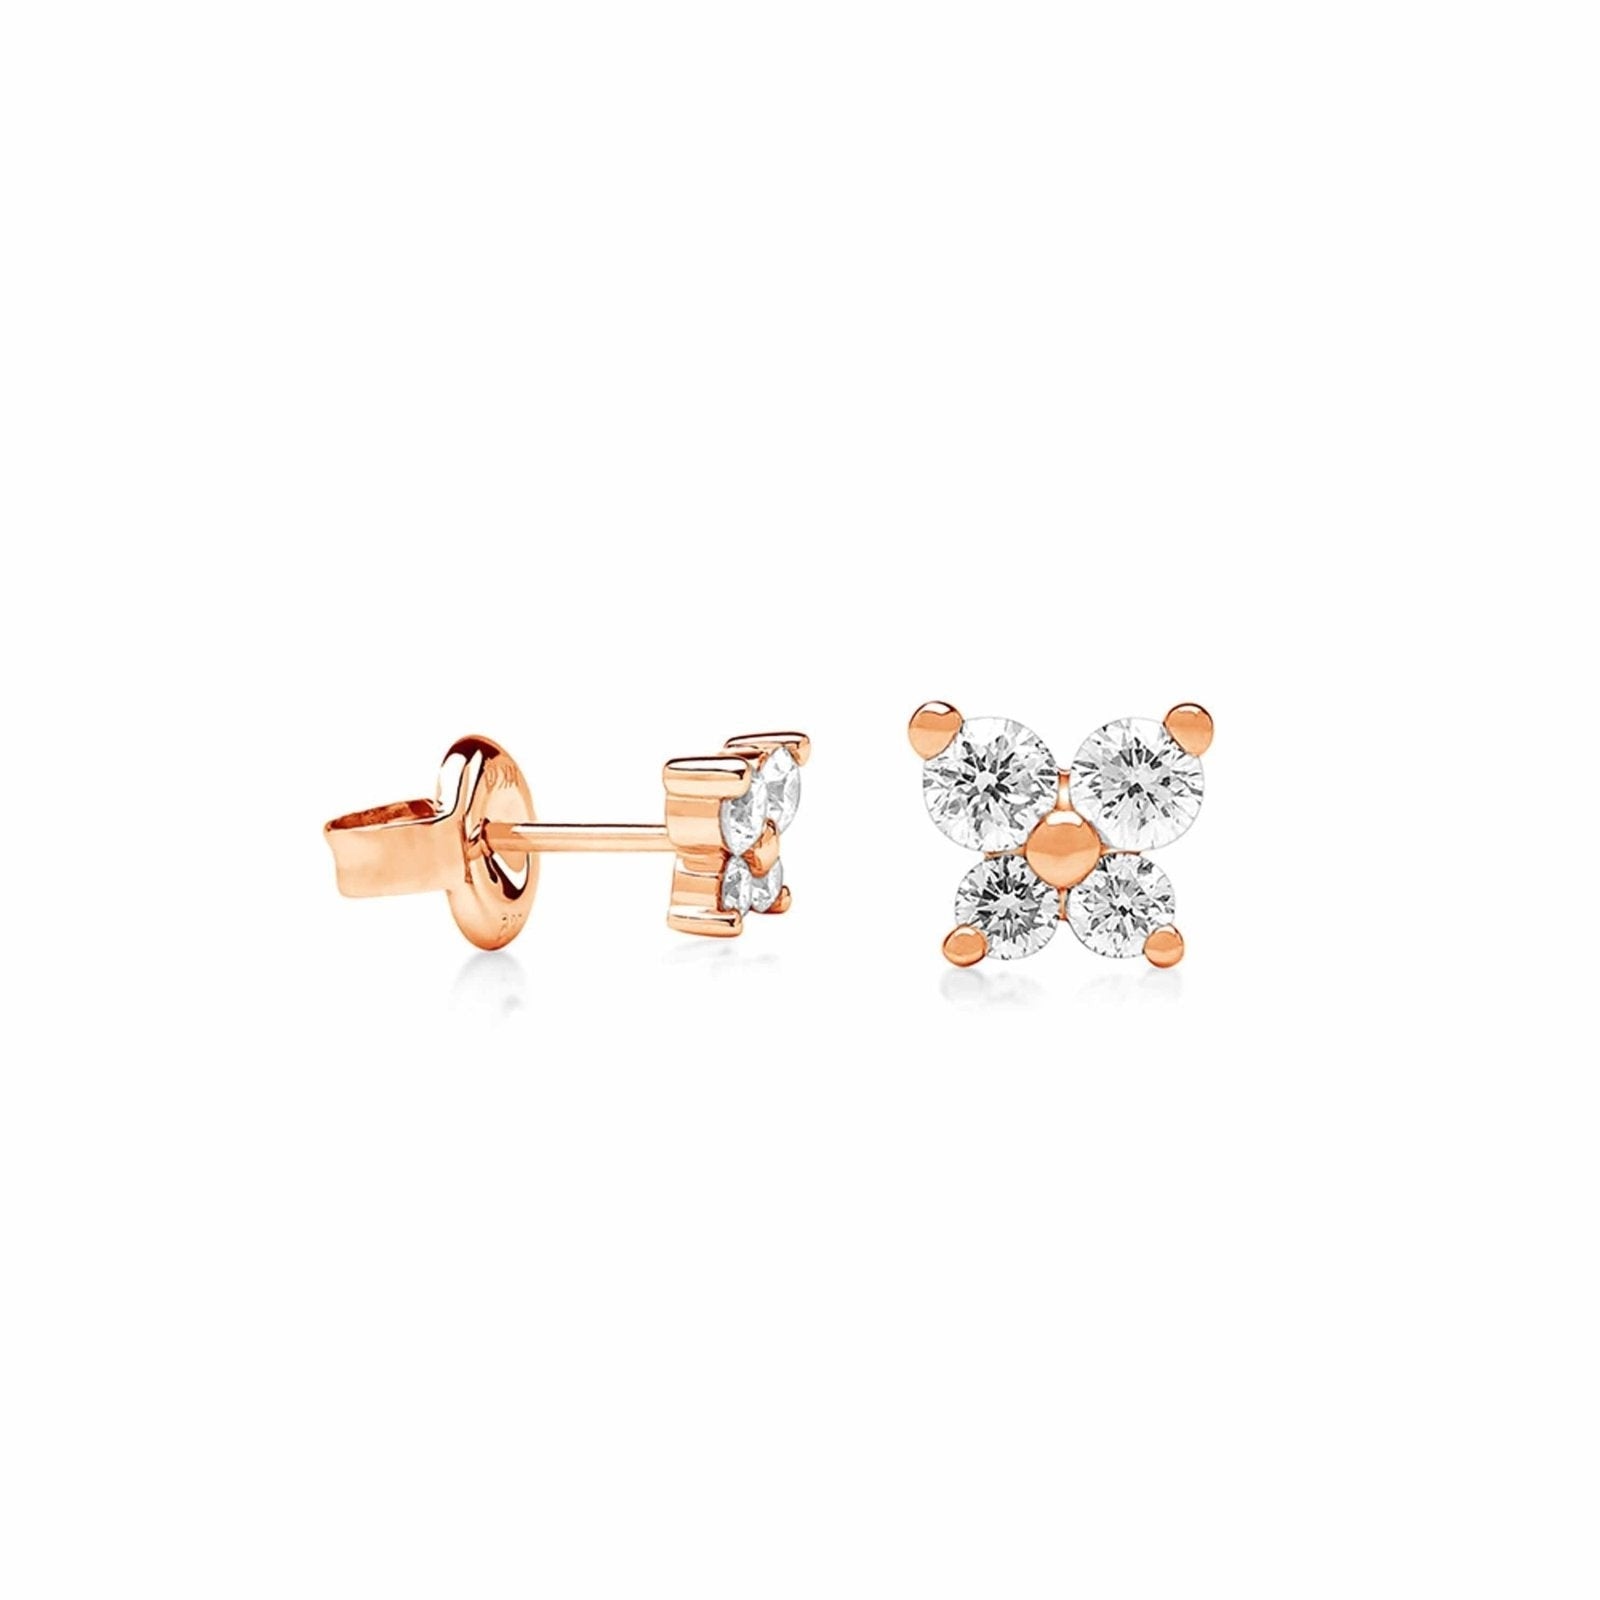 Linea - Nature Inspired Diamond Stud Earring in Solid Gold Earrings Estella Collection #product_description# 17560 14k Birthstone Birthstone Earrings #tag4# #tag5# #tag6# #tag7# #tag8# #tag9# #tag10#